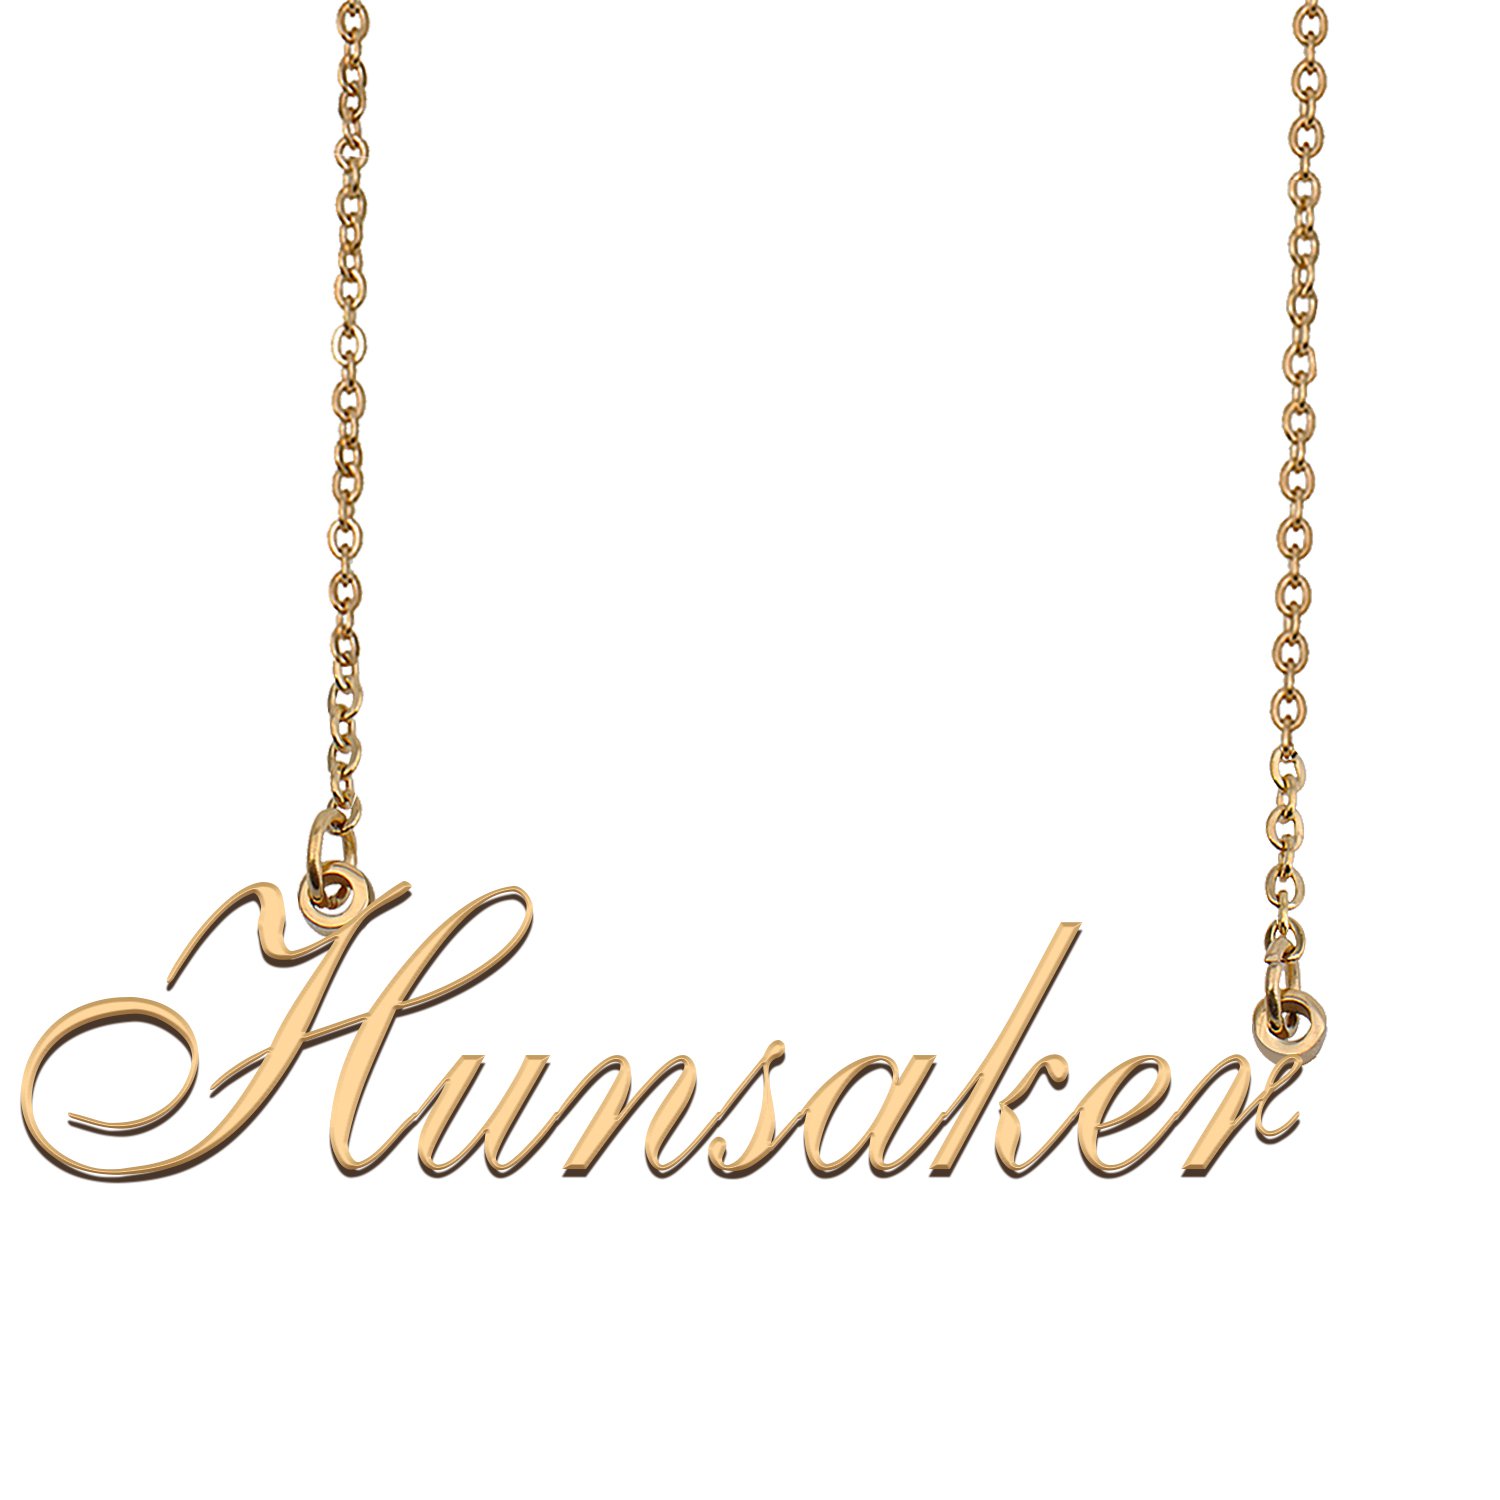 Personalized My Name Necklace Dainty personal Initial Necklace Hunsaker